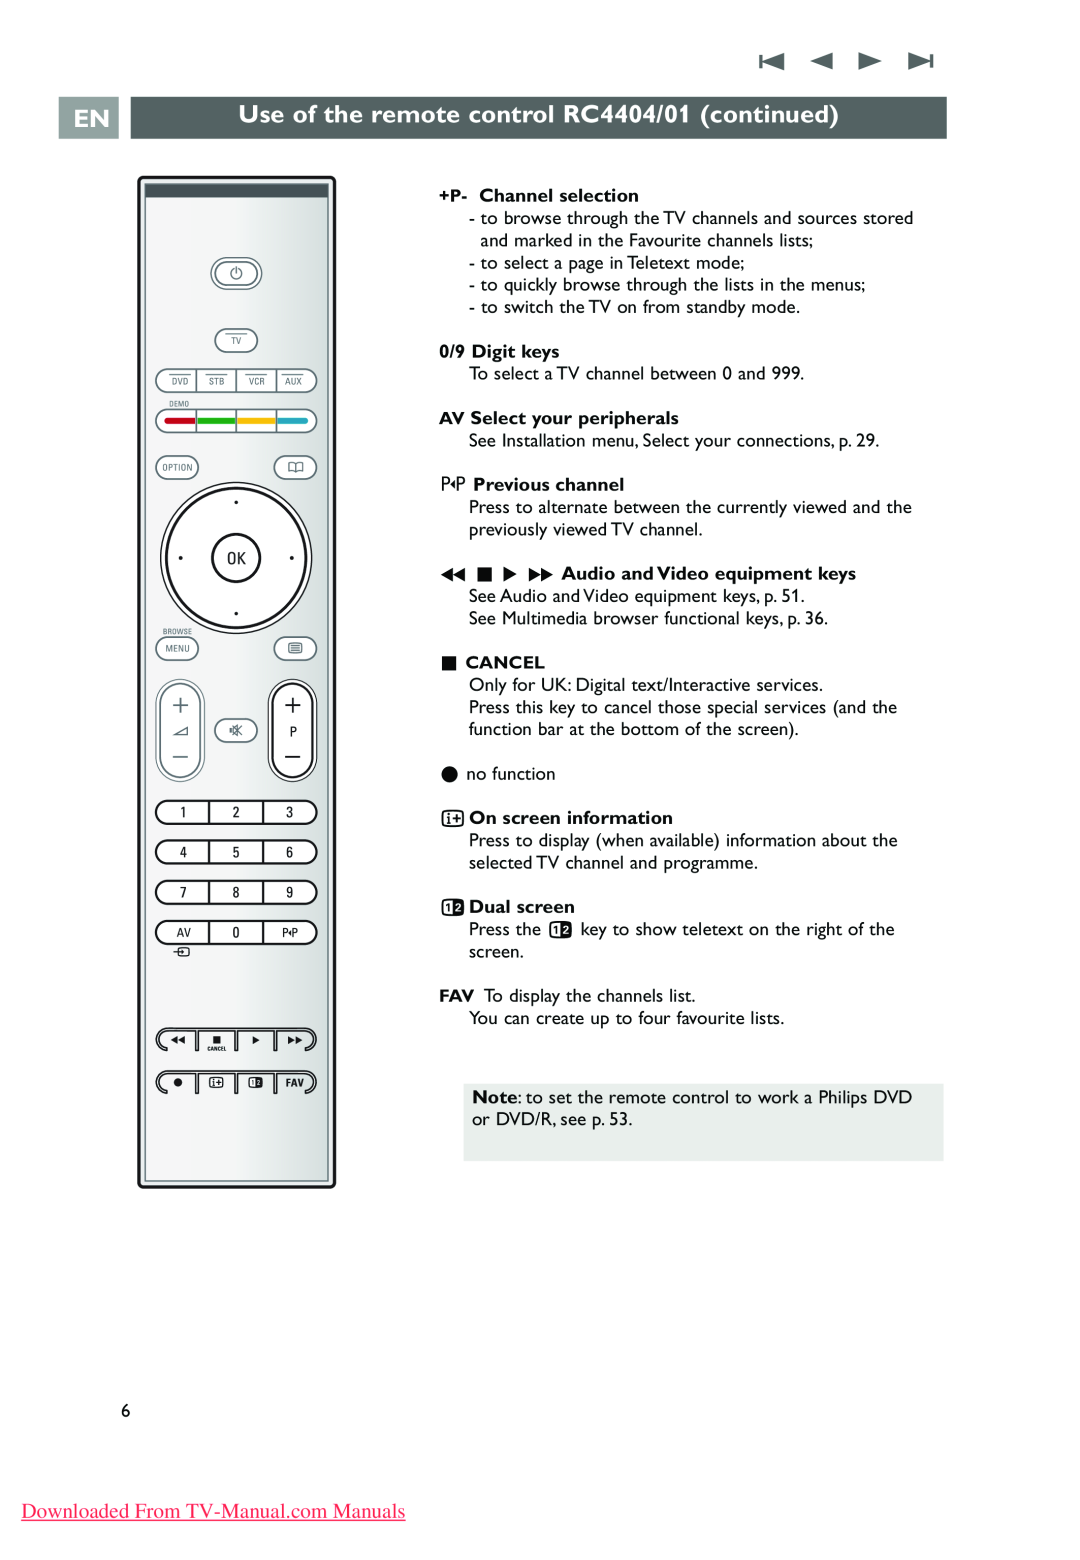 Philips 32PF9631D/10 Use of the remote control RC4404/01 continued, +P- Channel selection, 0/9 Digit keys, bDual screen 